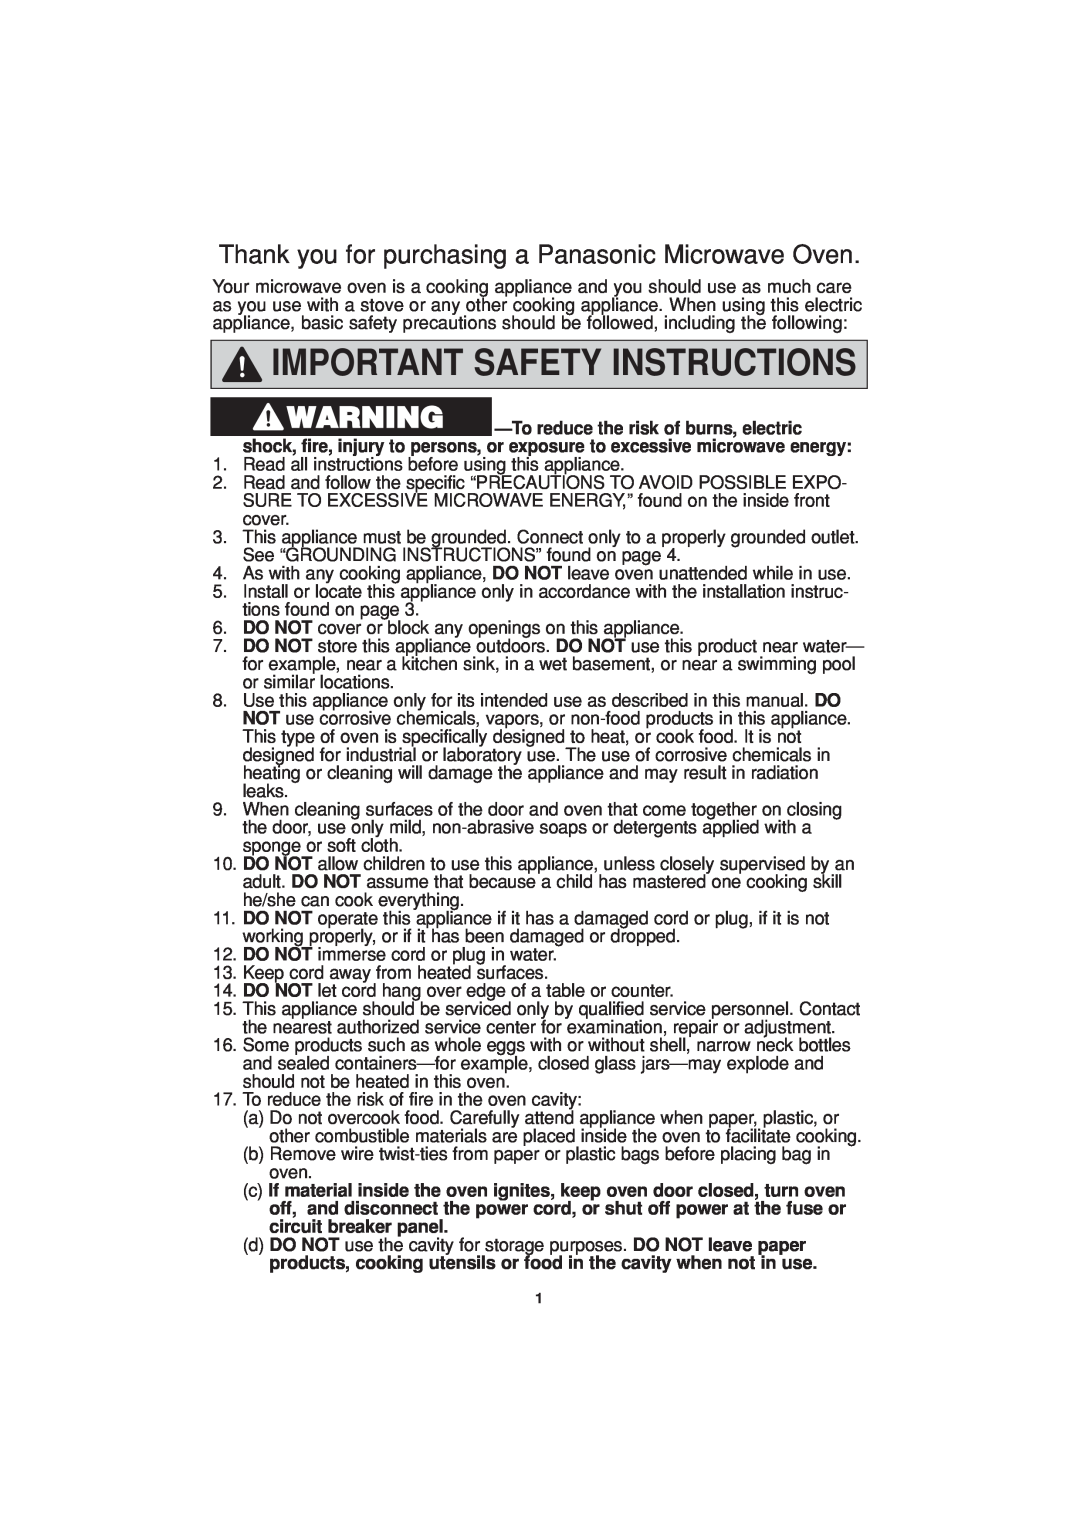 Panasonic NN-H634, NN-H644 Important Safety Instructions, Thank you for purchasing a Panasonic Microwave Oven 